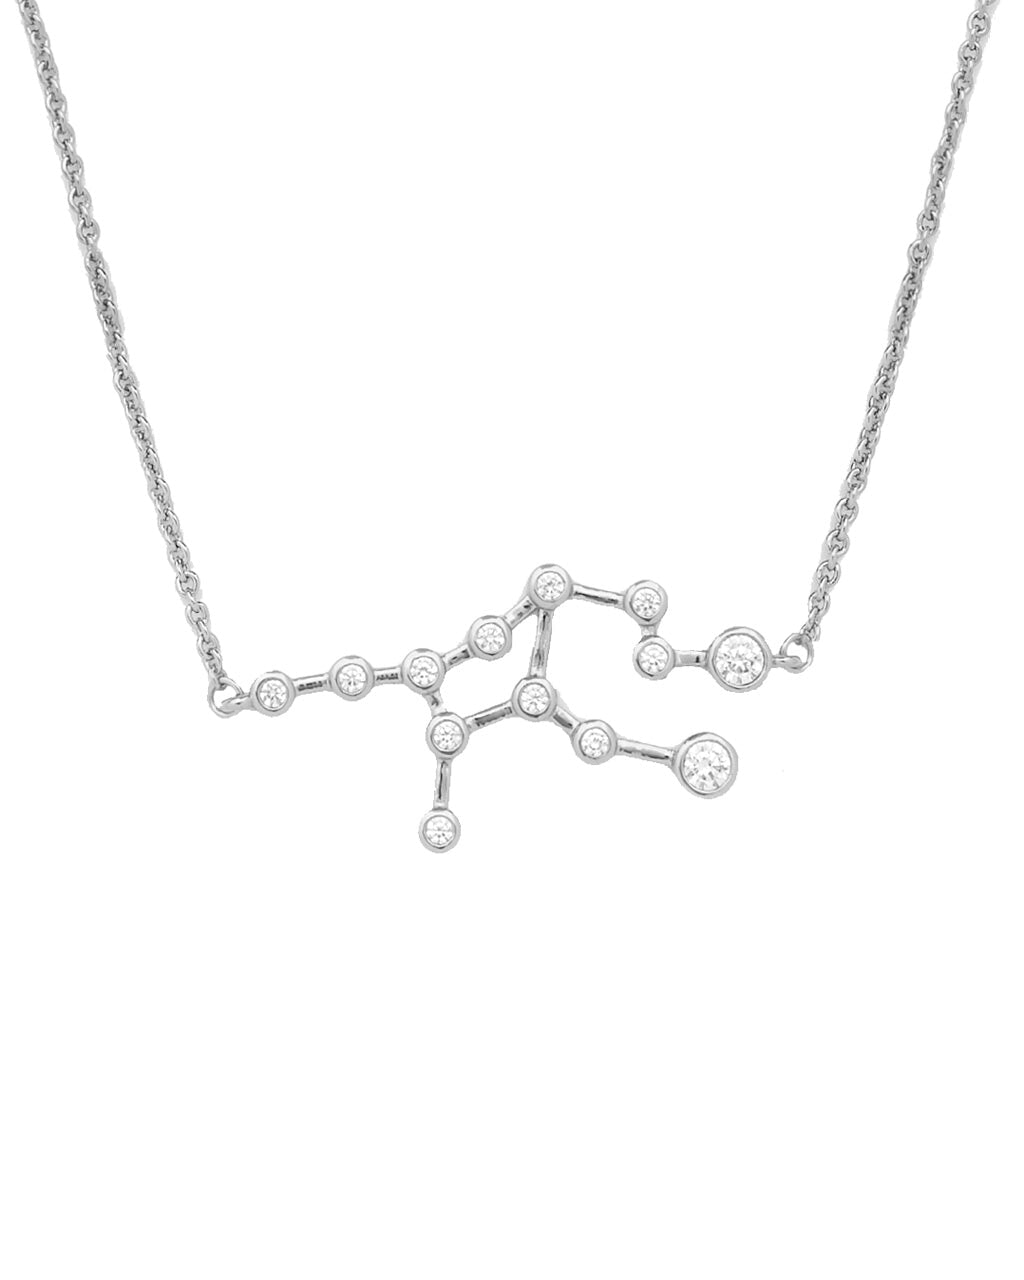 'When Stars Align' Constellation Necklace Necklace Sterling Forever Silver Virgo (Aug 23 - Sept 22) 